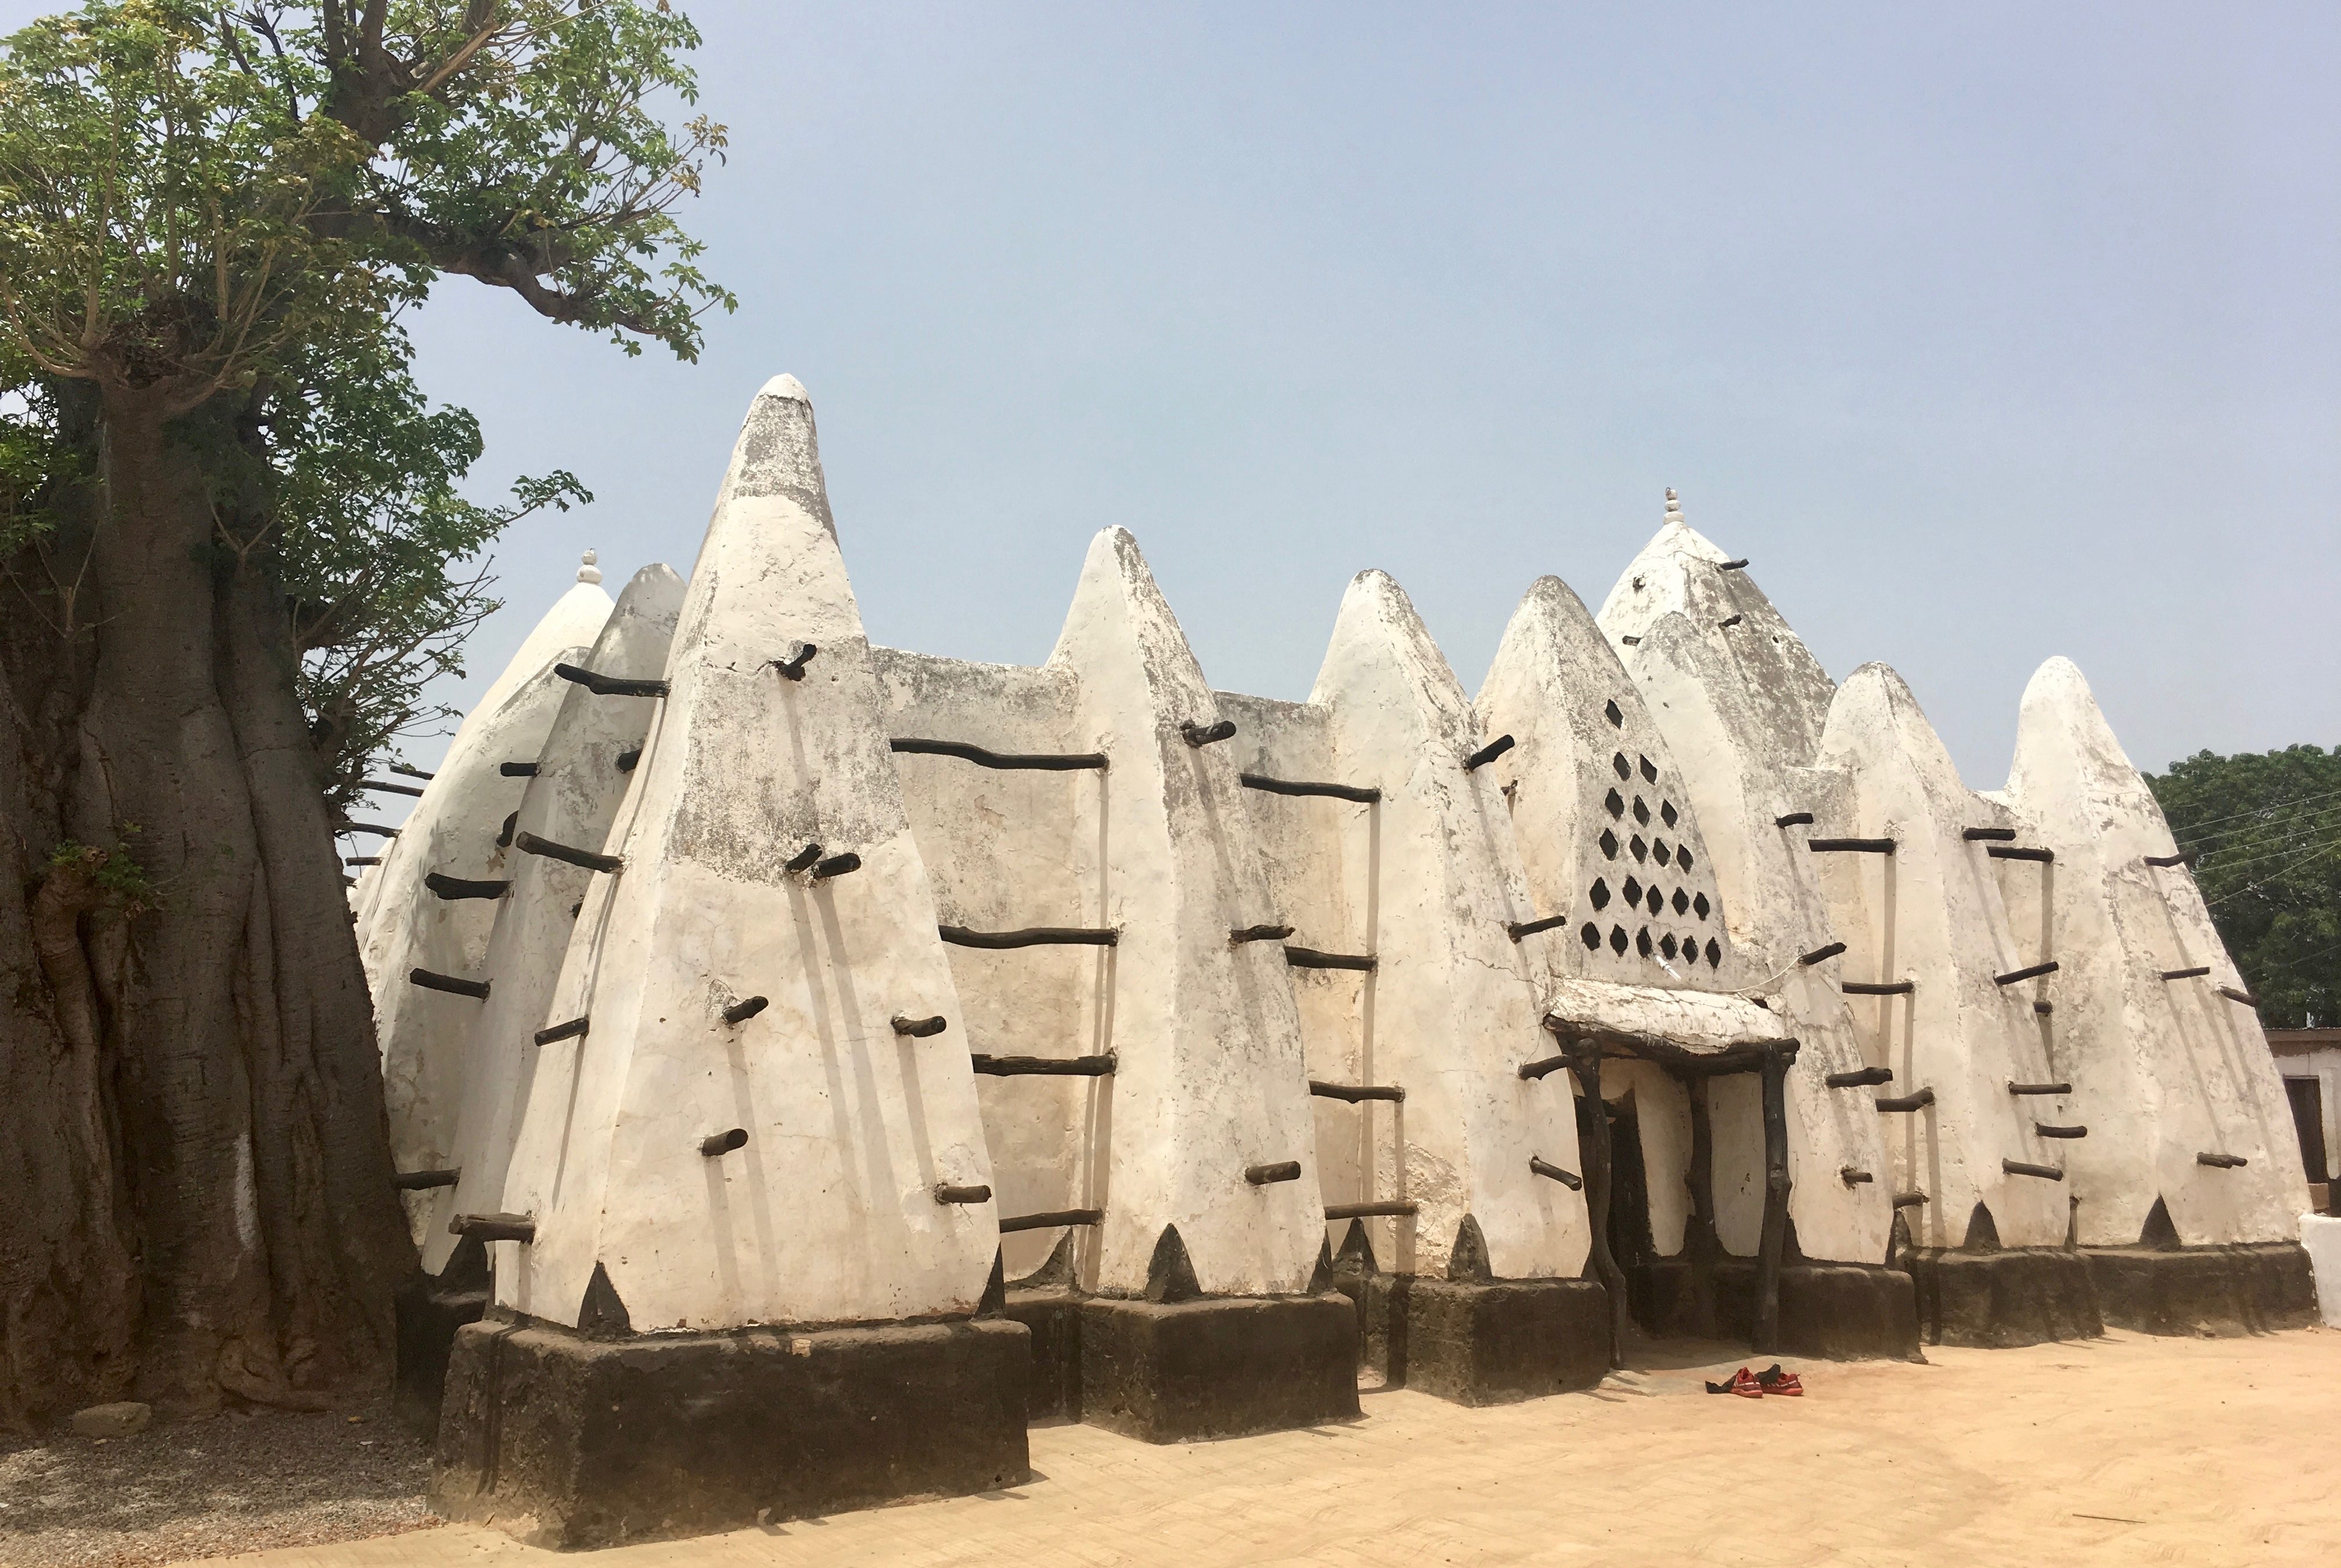 Larabang is home to a traditional stick and mud mosque which is thought to be the oldest in West Africa.